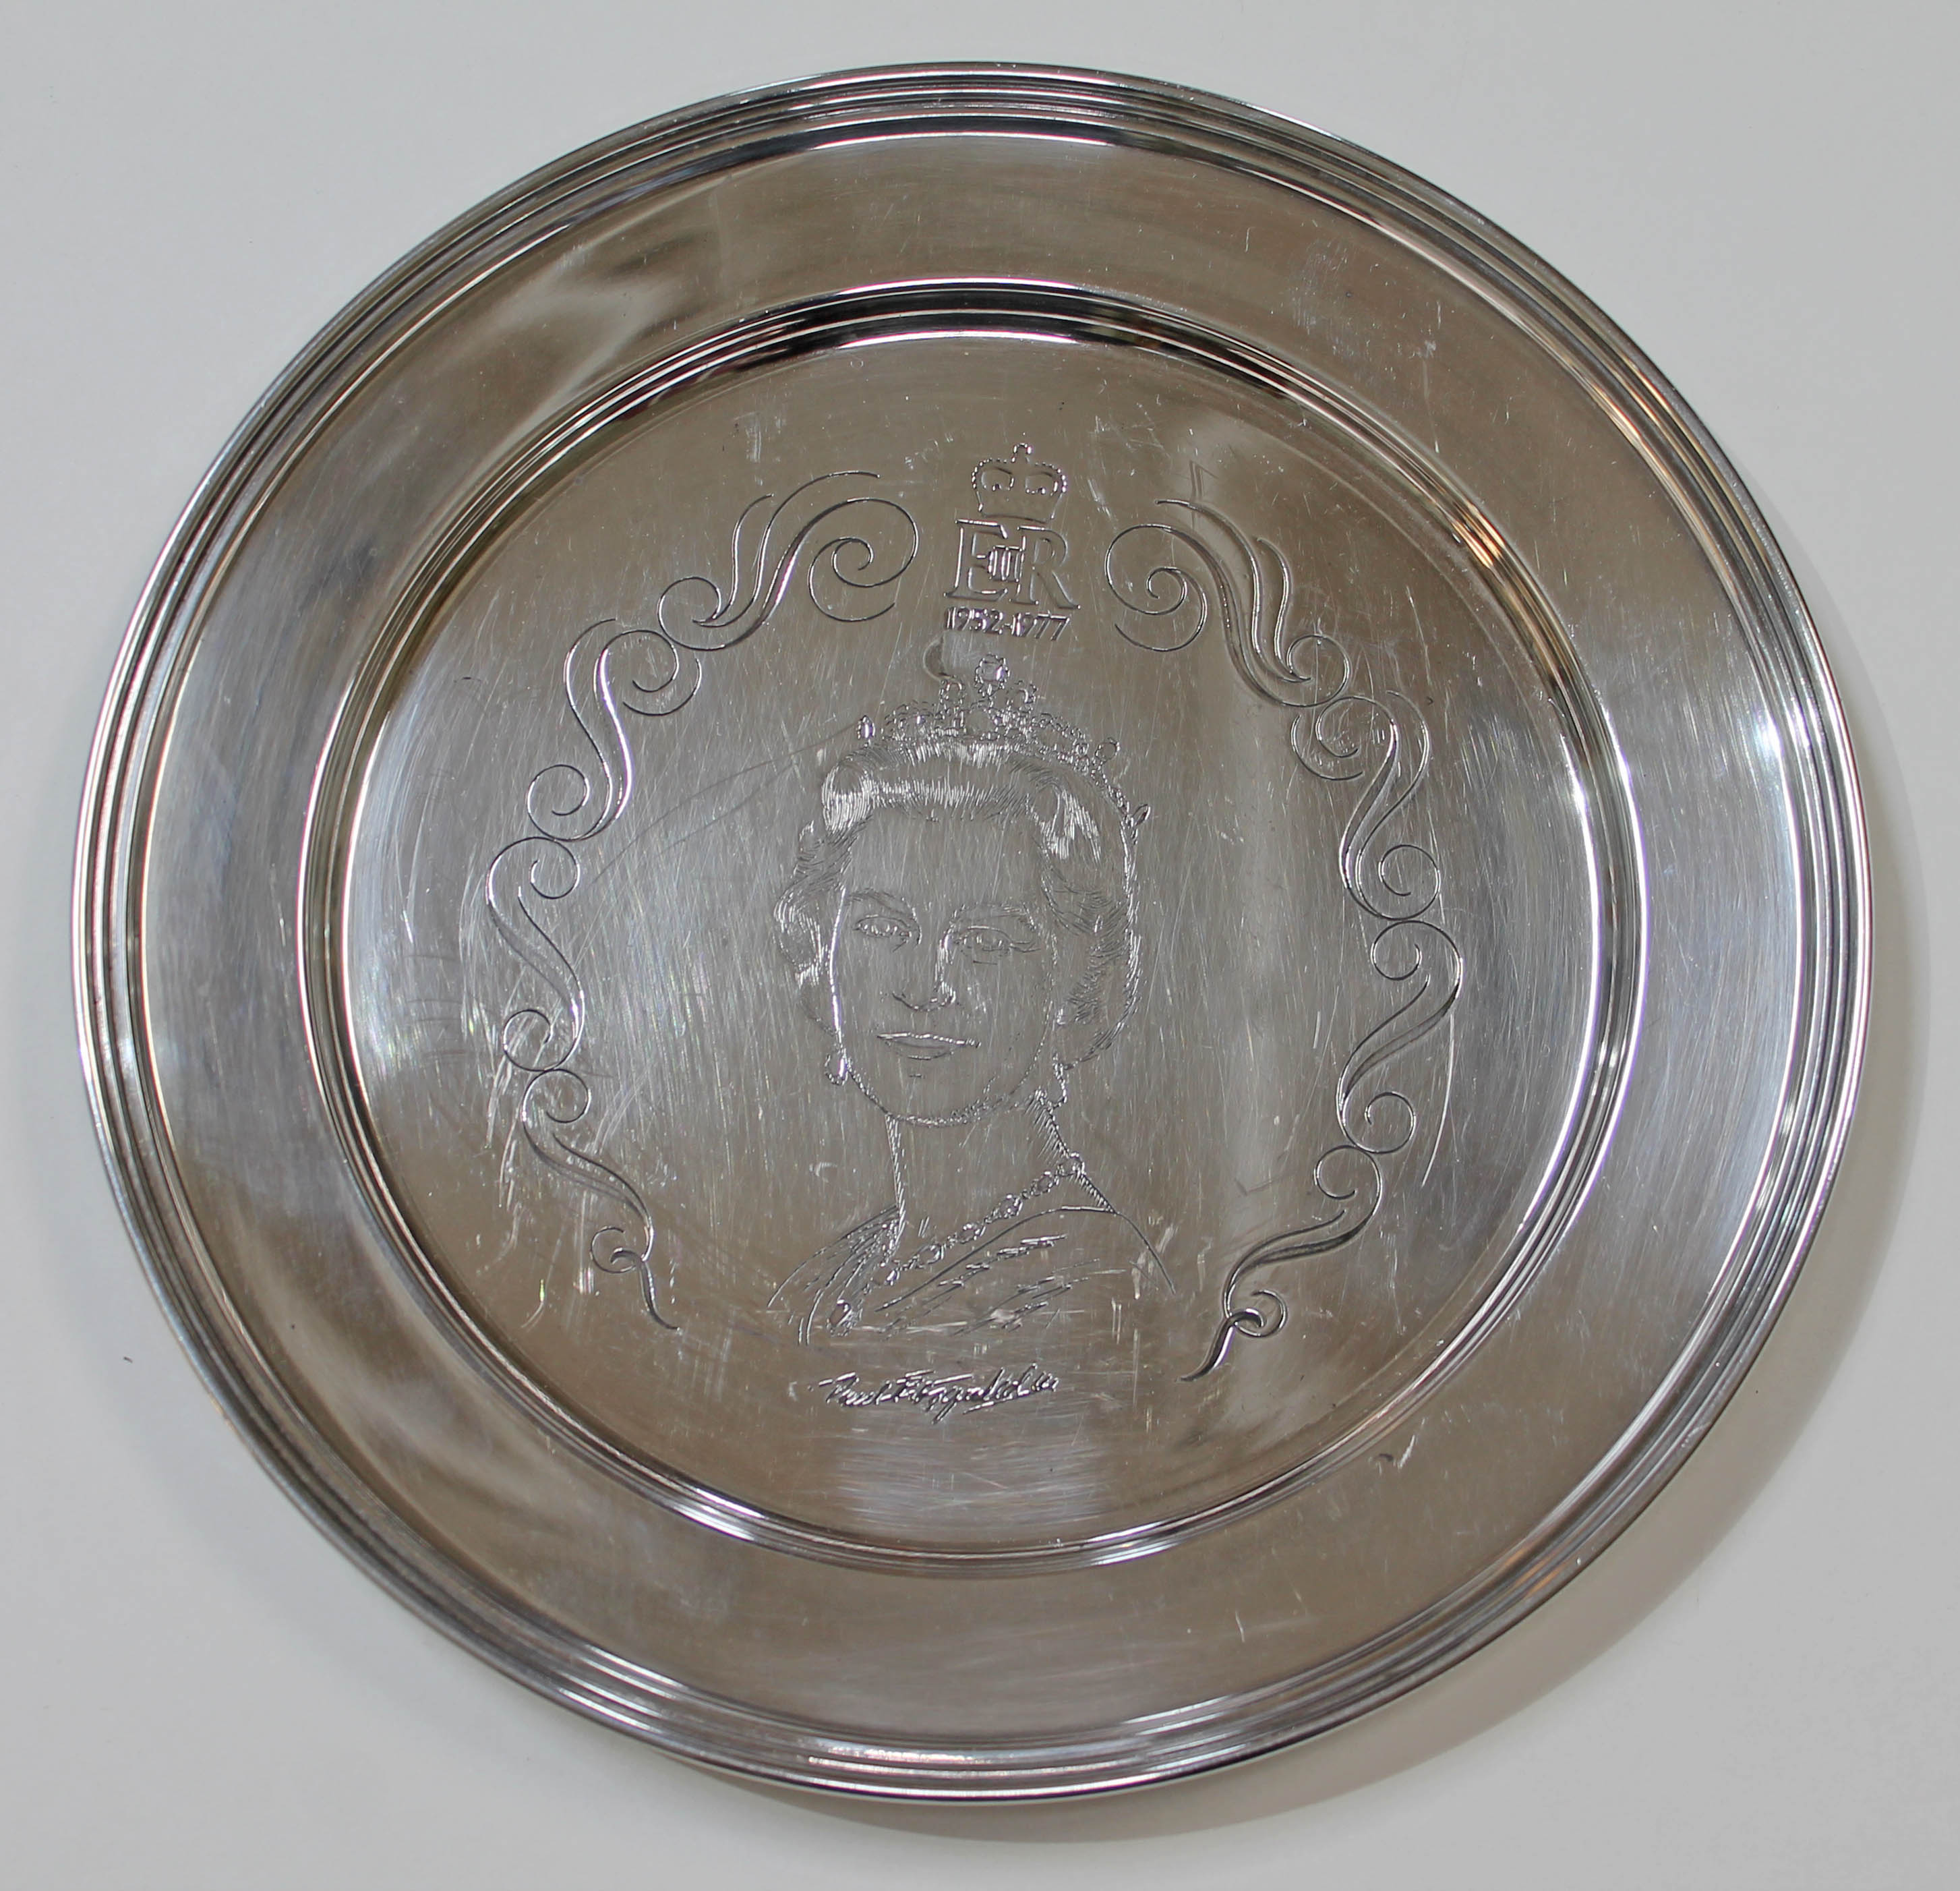 An Elizabeth II Queens Jubilee silver dish, wt. 11oz, diam. 23cm. Condition - ding above the Queen's